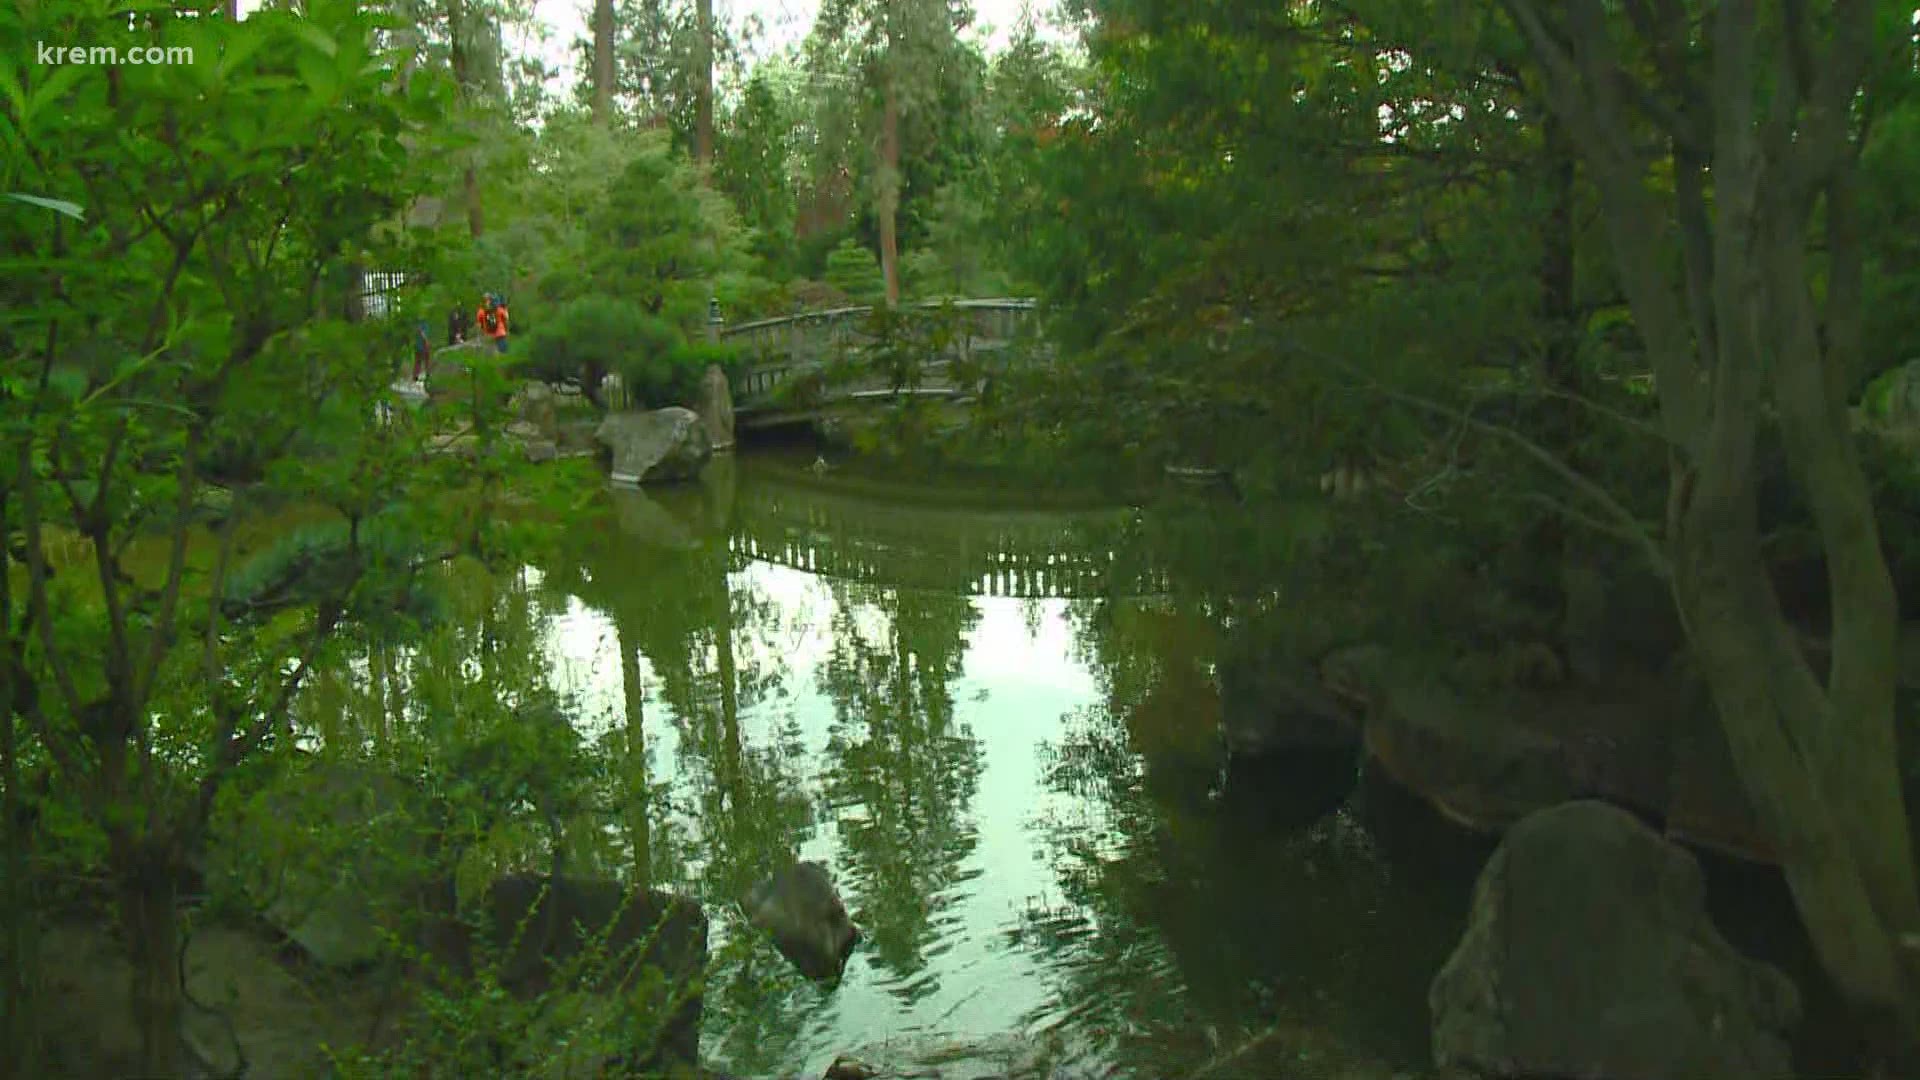 After being closed for a year, the Japanese Garden is reopening at Manito Park in Spokane.